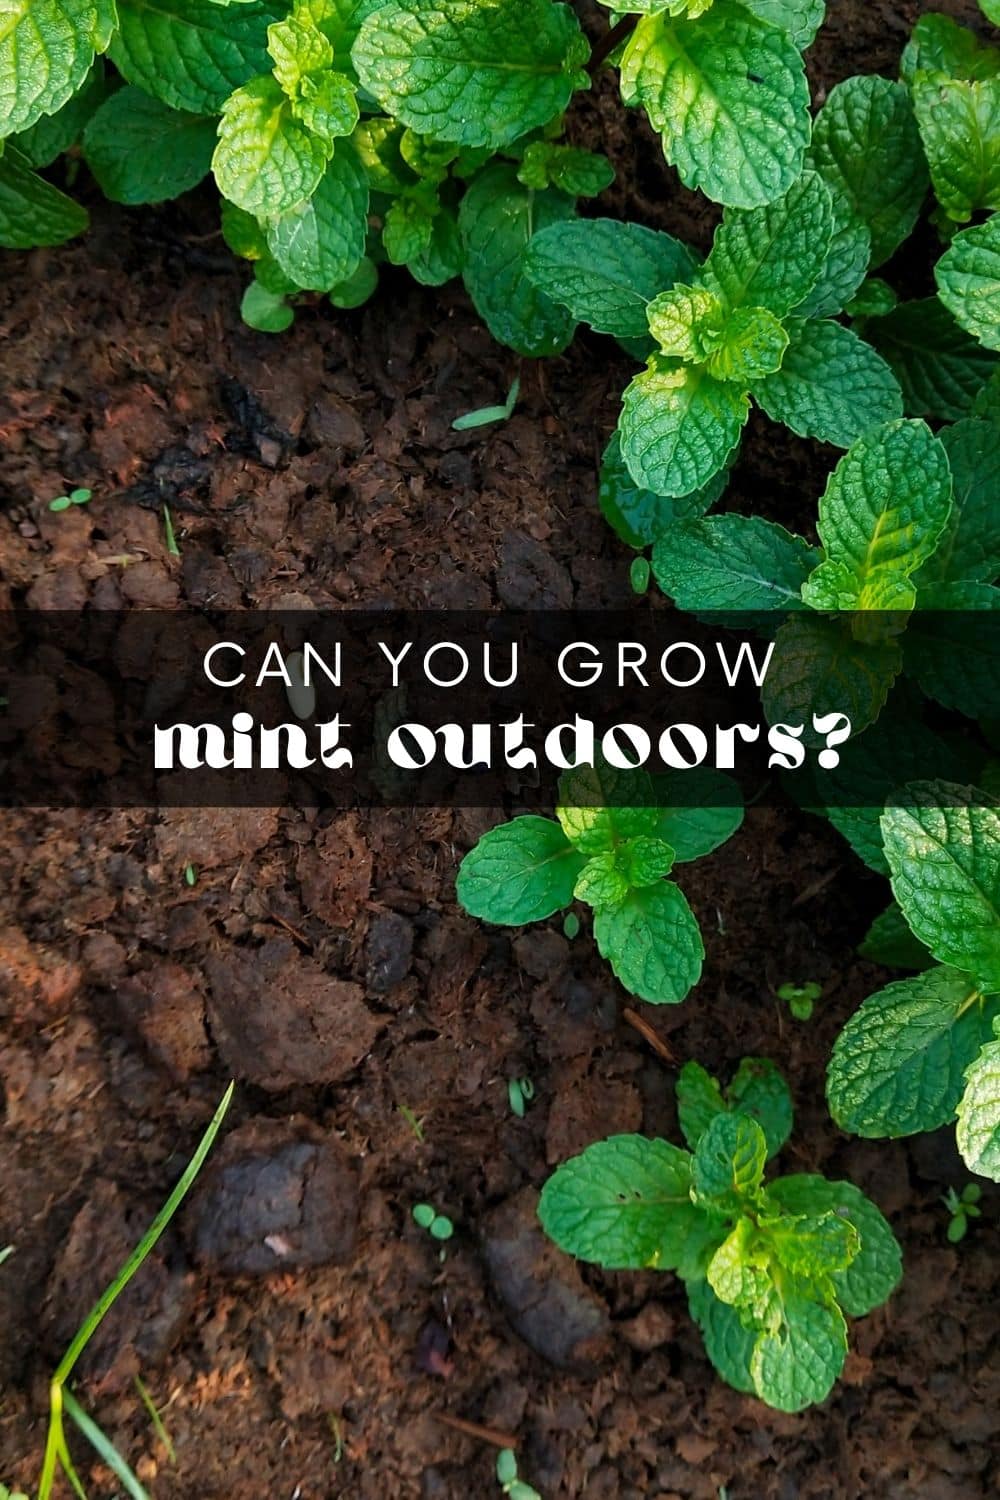 With its fresh taste and fragrant aroma, mint is a staple in any herb garden. It's quick growing and is super easy to care for. You can grow mint in containers or directly in the ground, and there are many varieties to choose from!